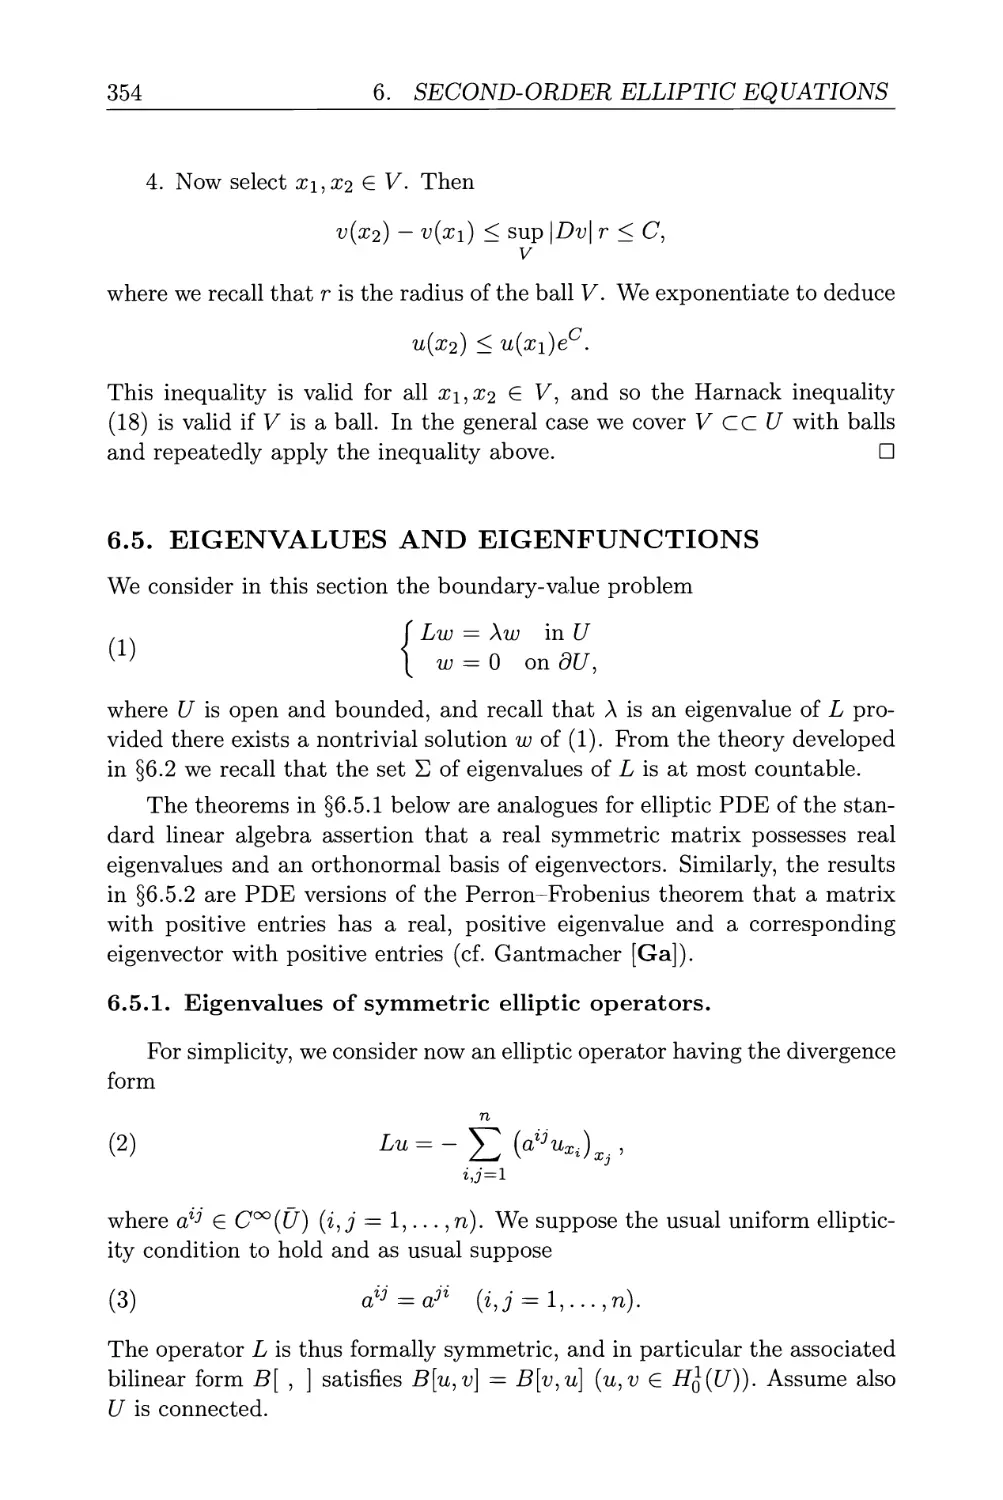 6.5. Eigenvalues and eigenfunctions